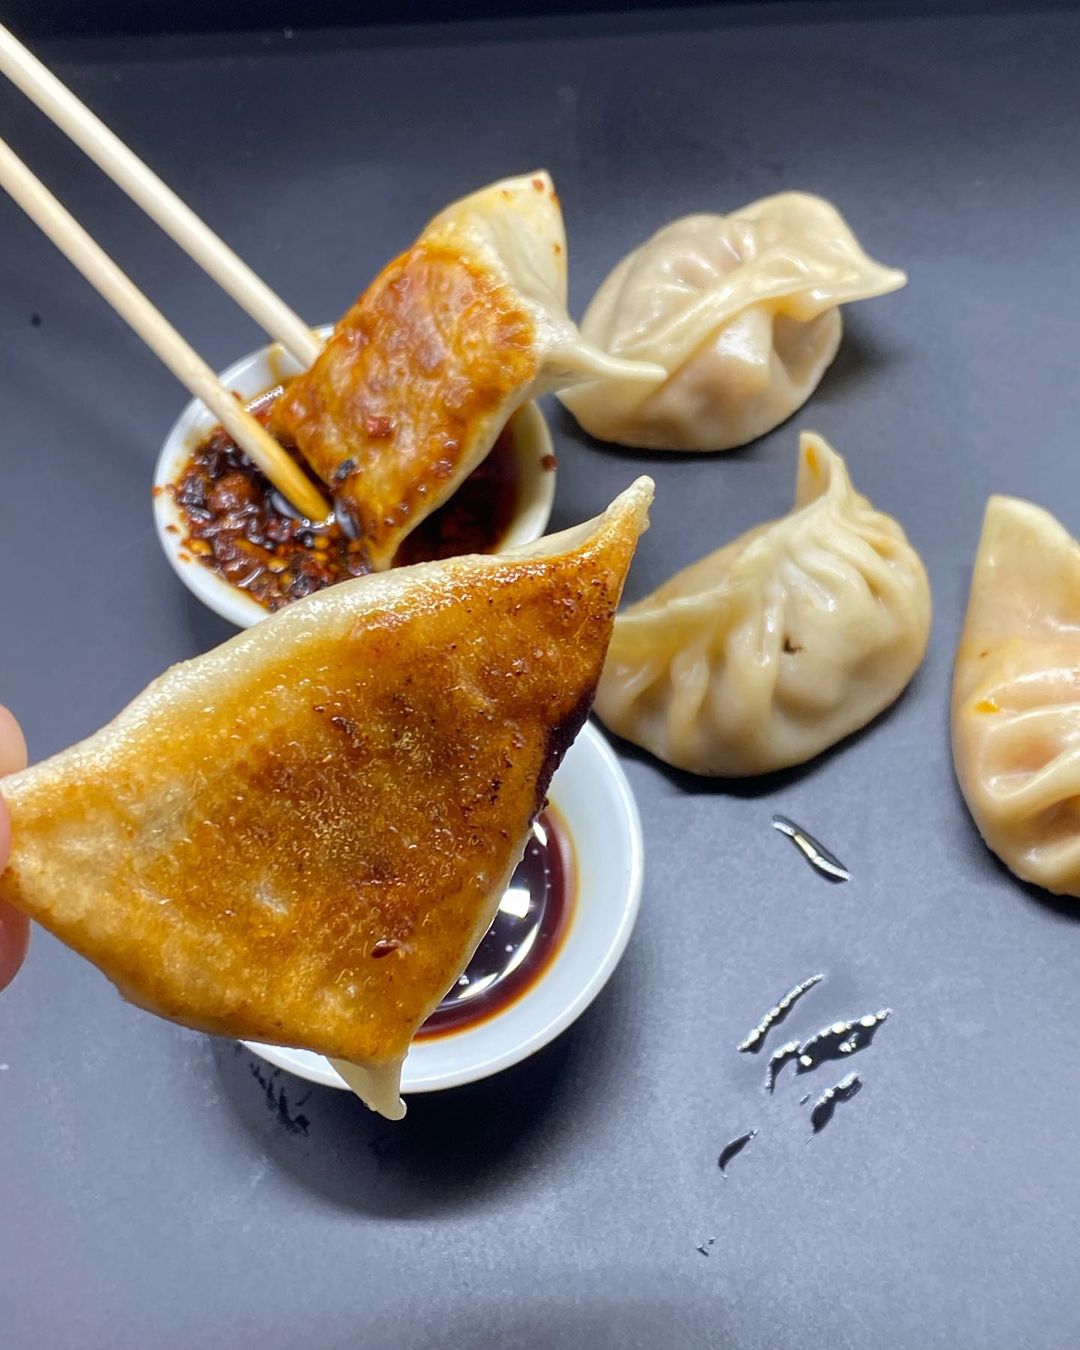 Dim sum meaning small plates or portions of foods similar to Spanish tapas. We  provide delicious traditional and modern Chinese/Asian dumplings and filled bao sandwiches using beautiful produce from the South West.